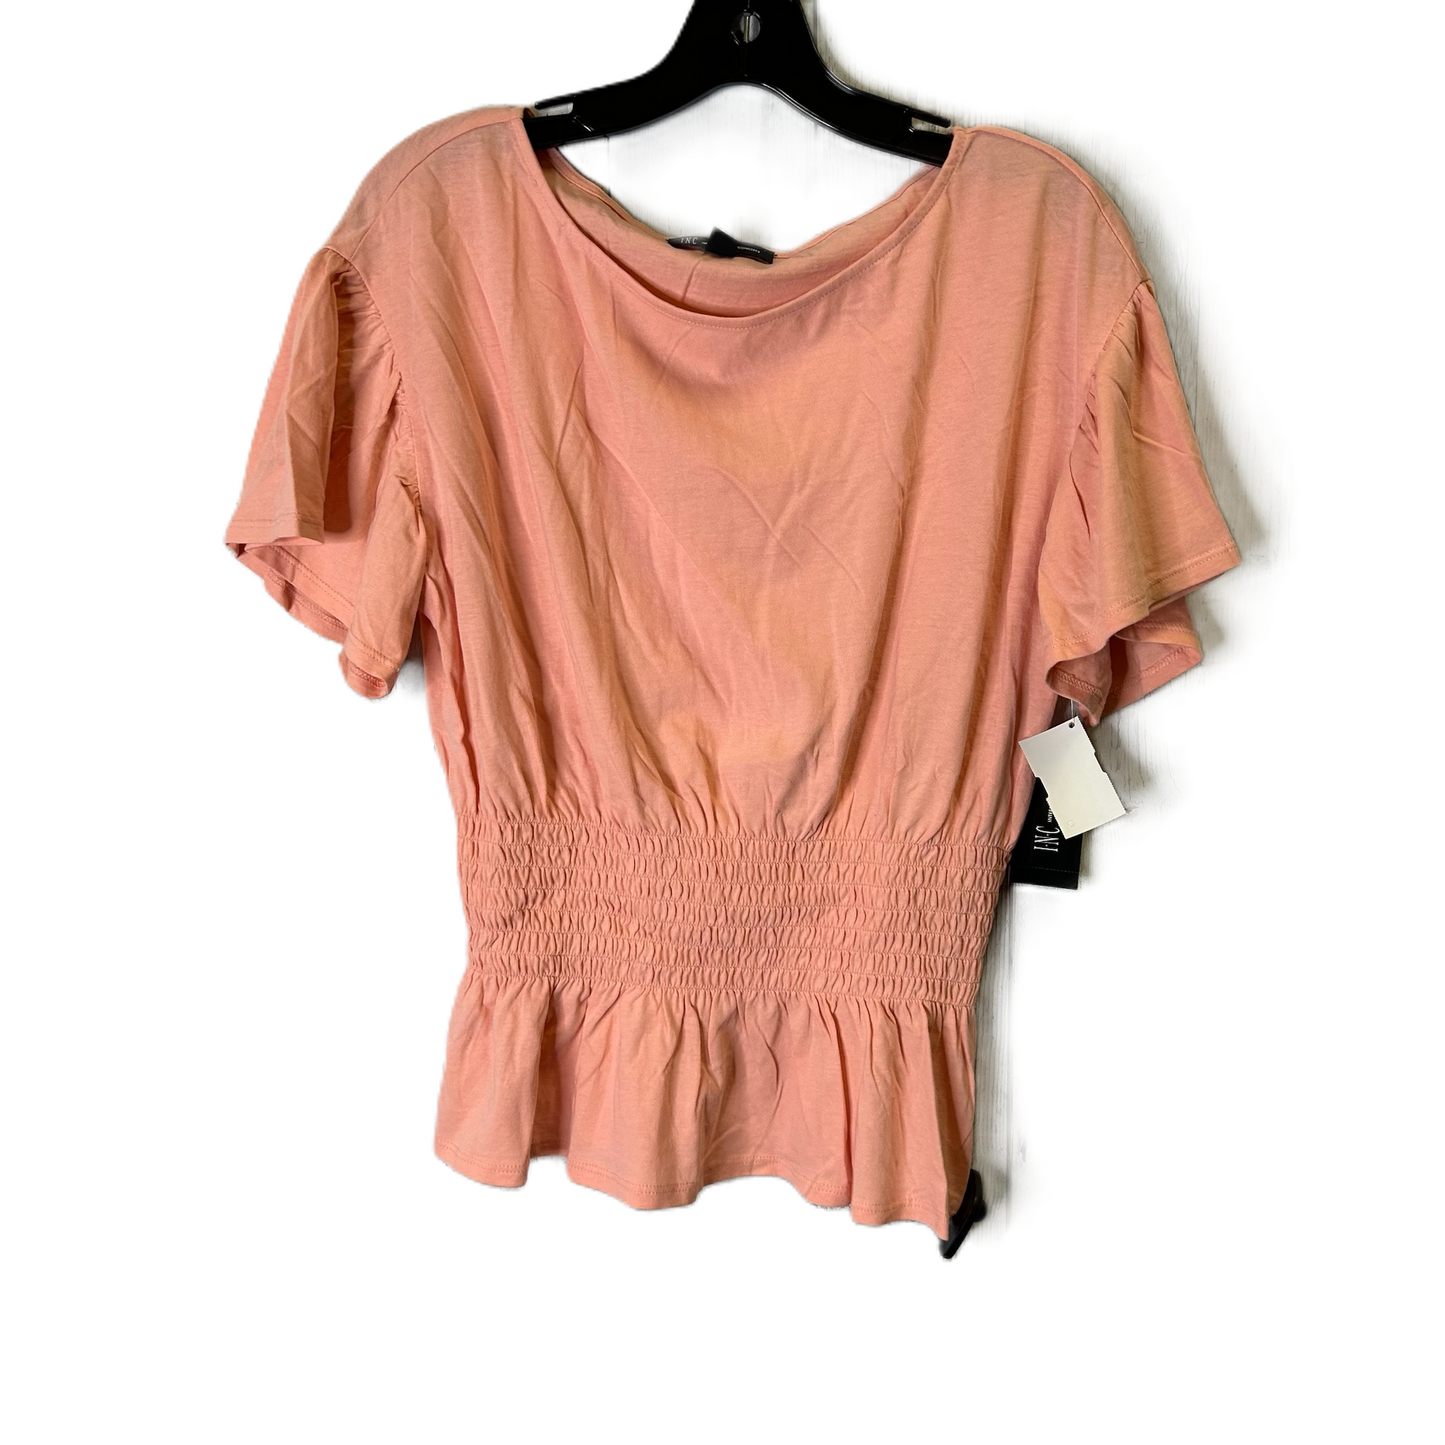 Pink Top Short Sleeve By Inc, Size: M